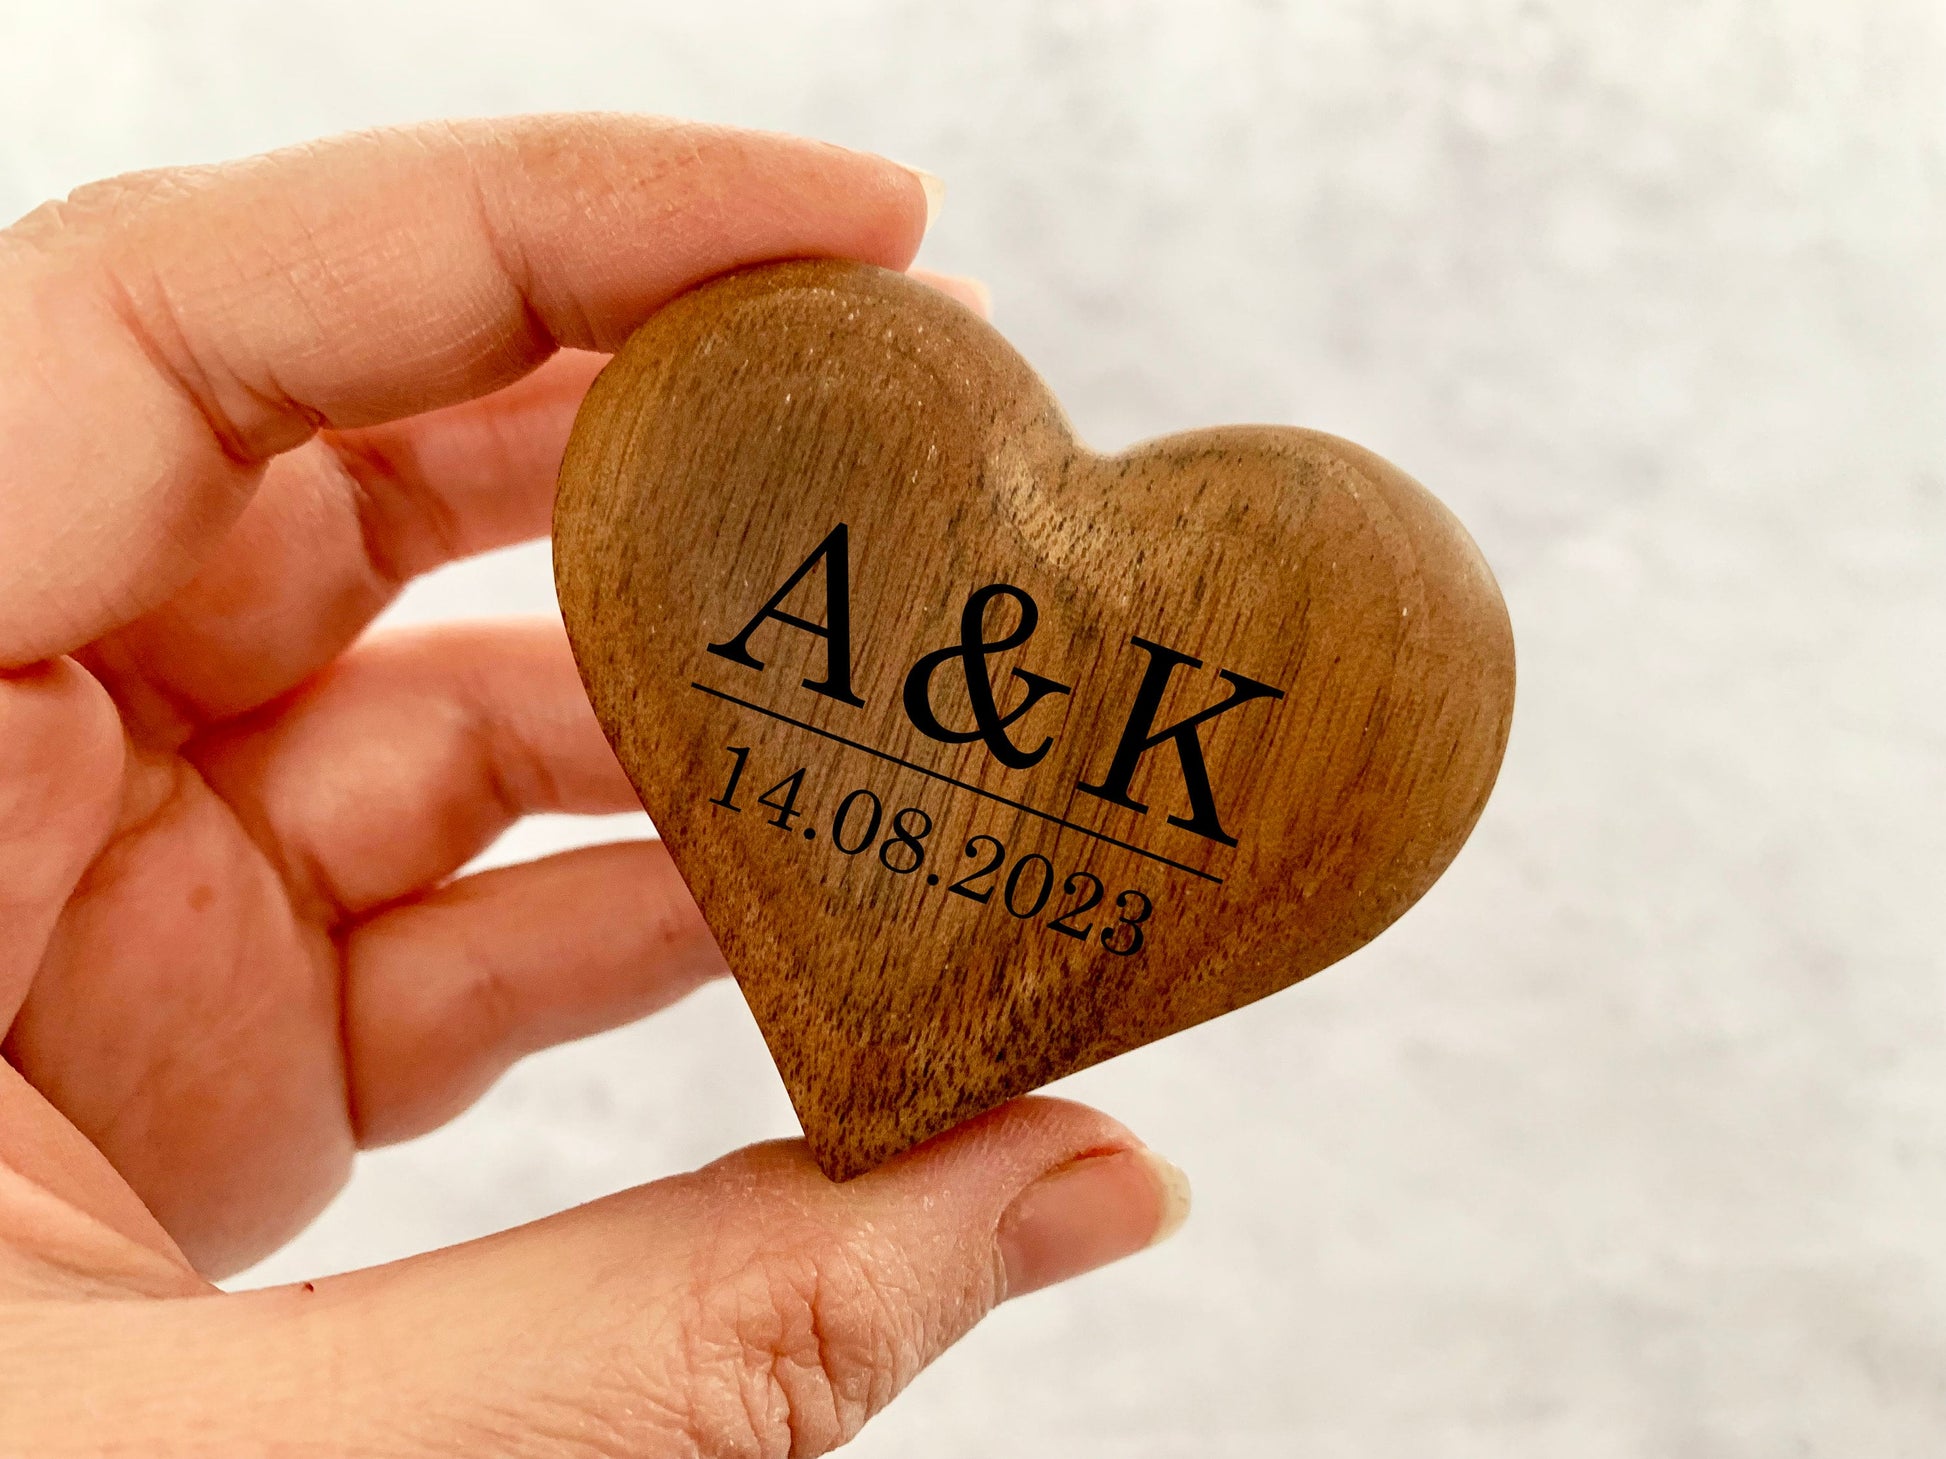 Personalised Heart Engraved Wooden Wedding Ring Box, Engagement Ring Box with Initials, Anniversary Gift - Resplendent Aurora